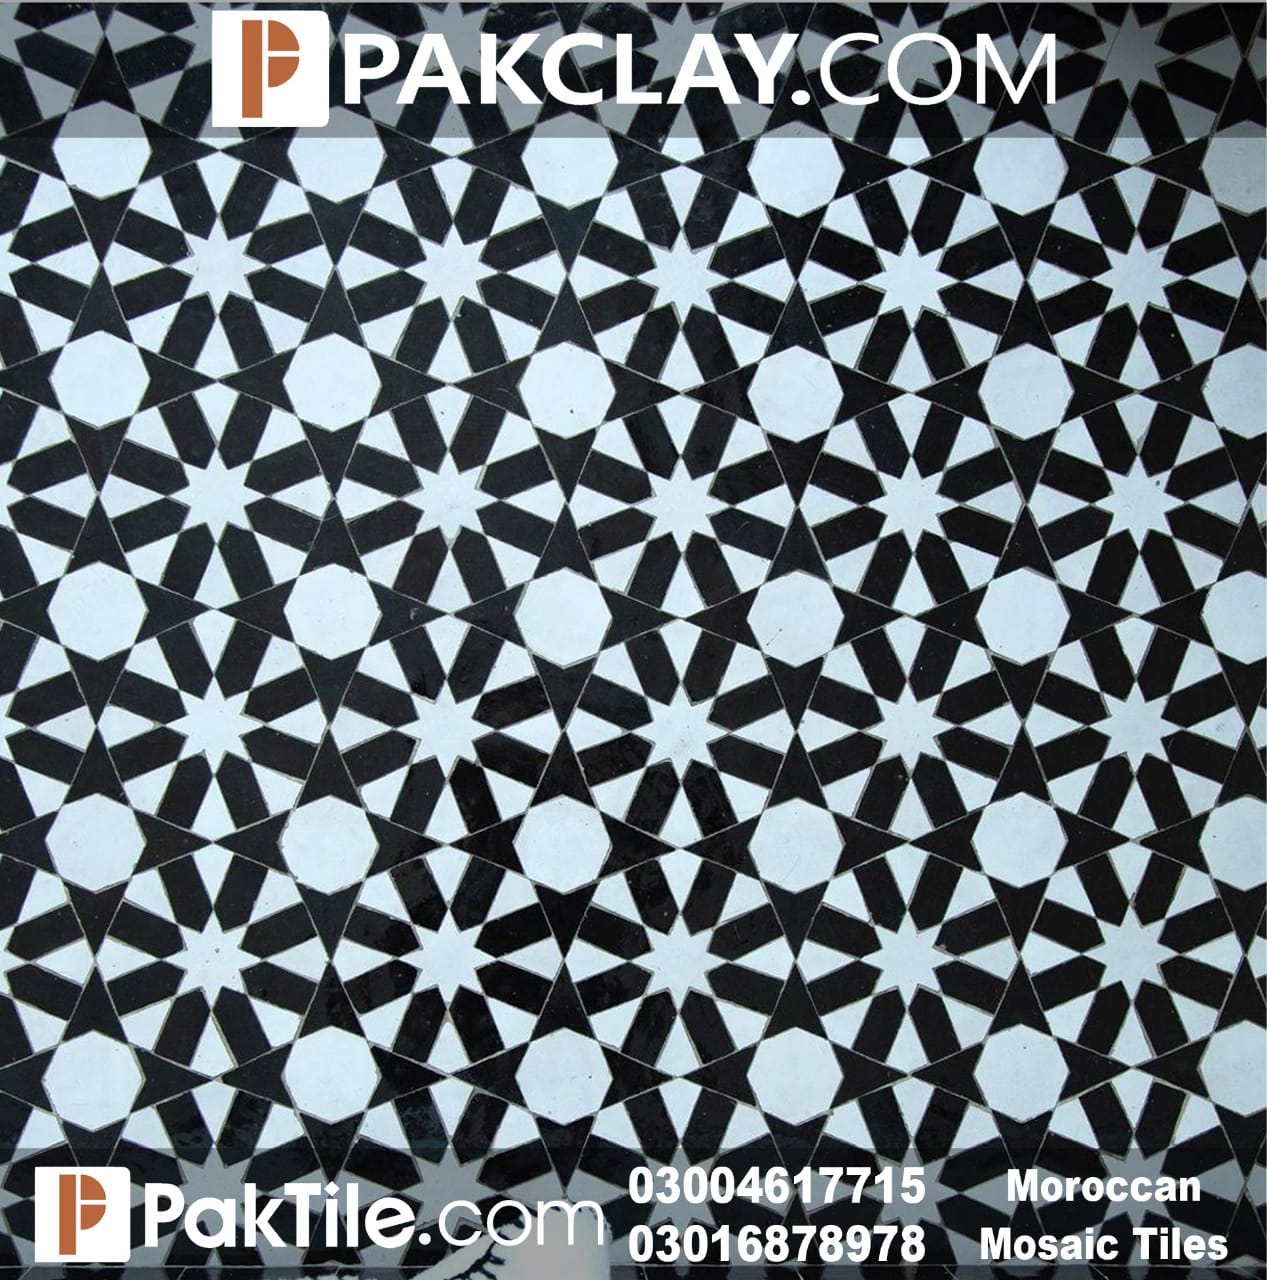 Pak Clay Moroccan Mosaic Tiles in Lahore